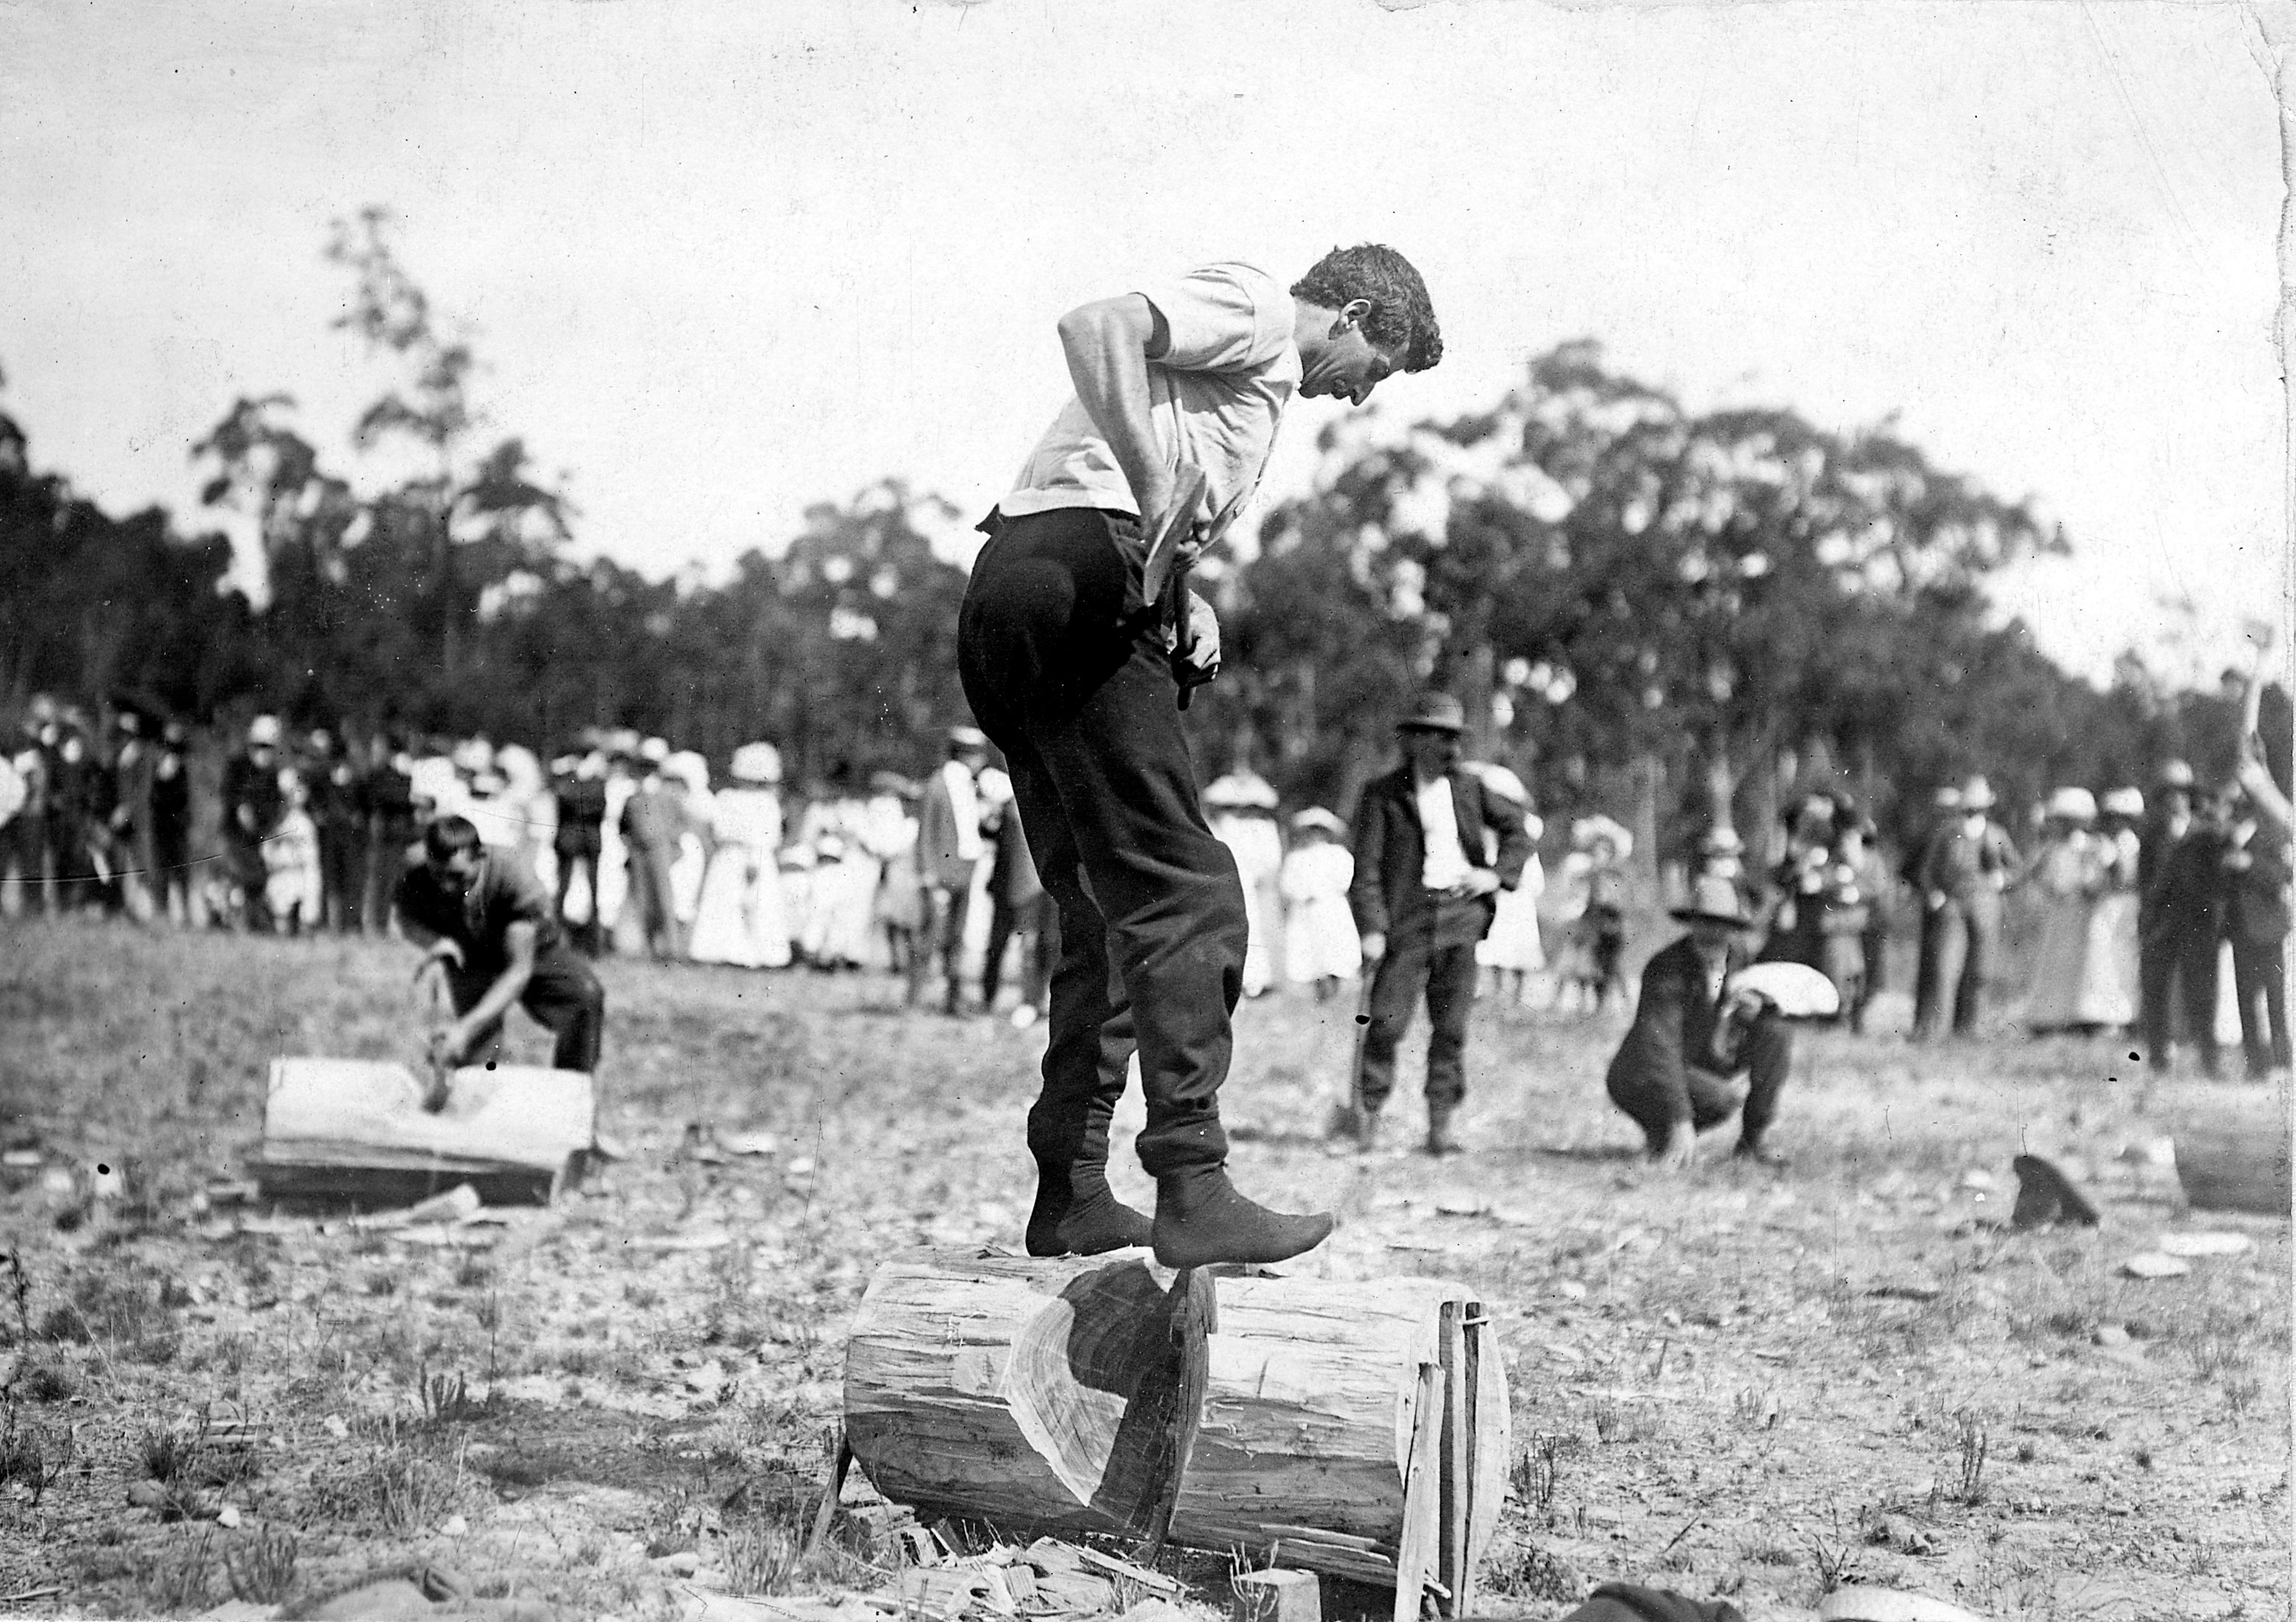 Athlete at a historical logger sports competition in Australia.